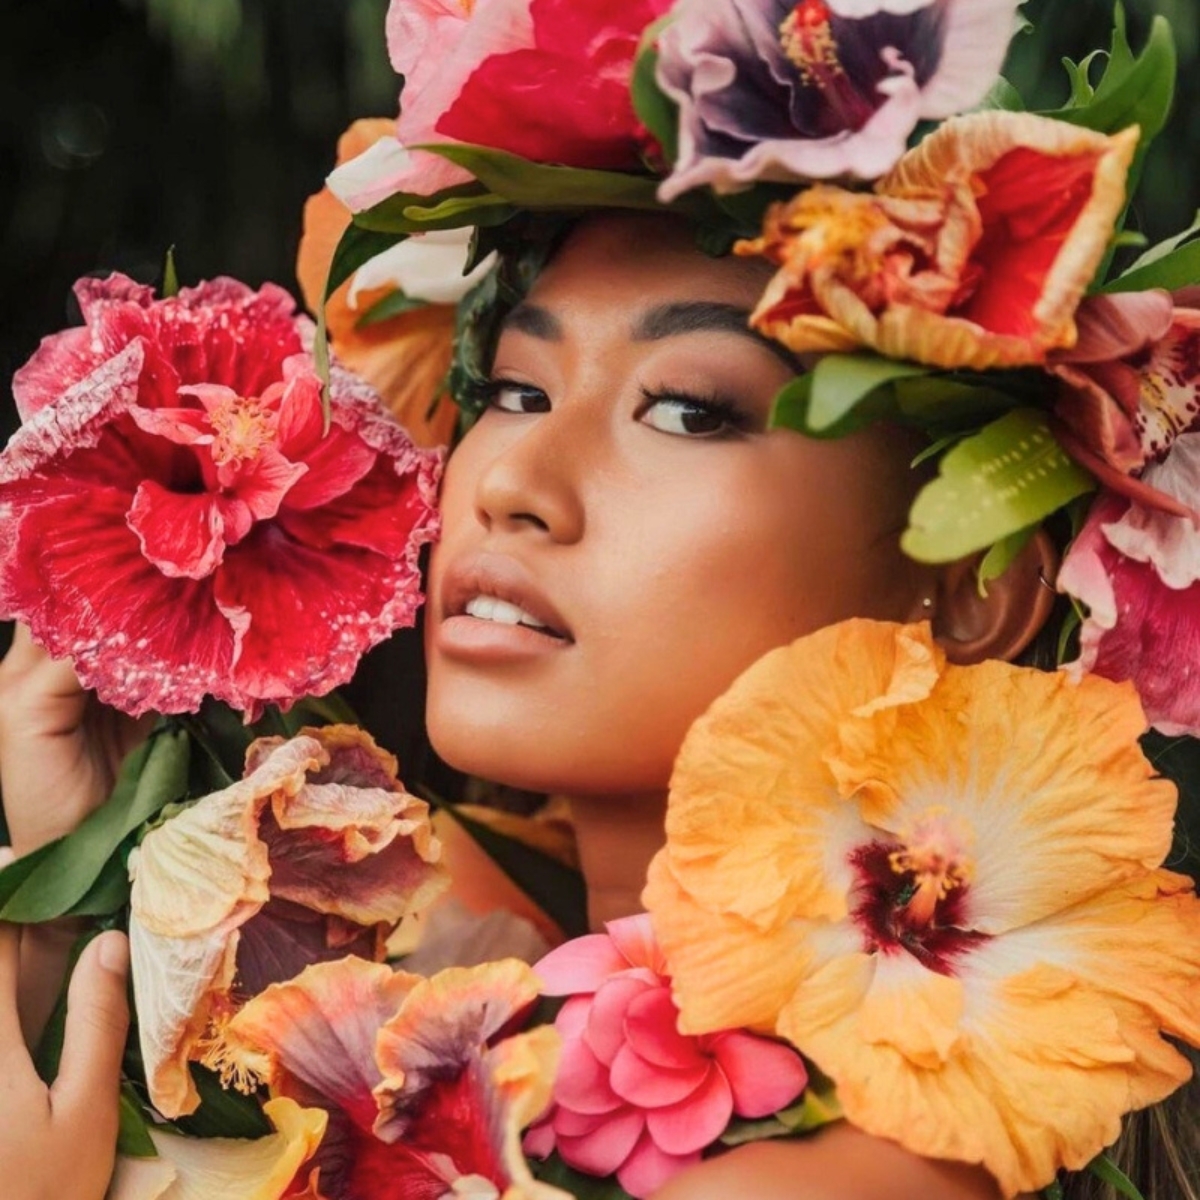 Lei Day celebrated with Hibiscus flowers